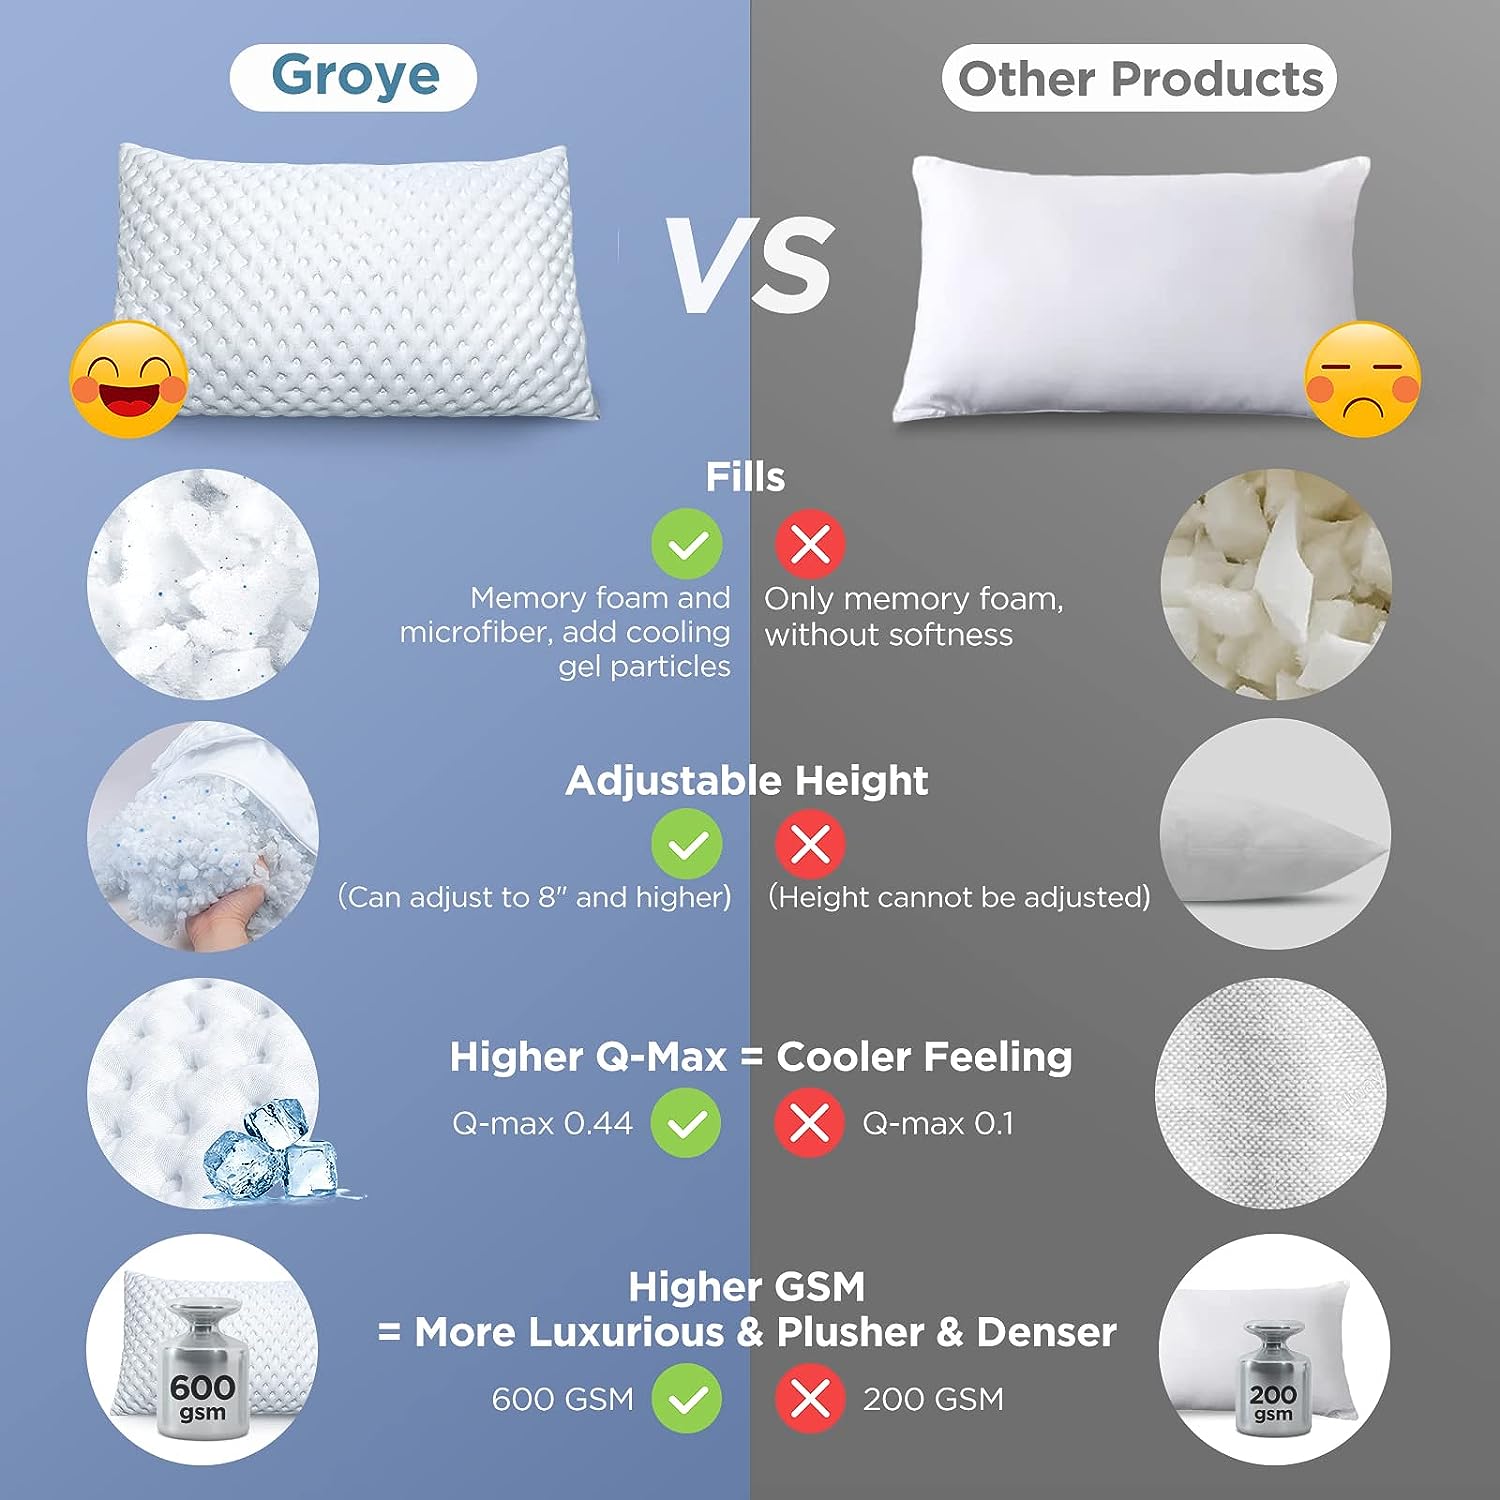 https://bigbigmart.com/wp-content/uploads/2023/08/Groye-Ultra-Cooling-Pillow-with-Gel-Particles-Shredded-Memory-Foam-Adjustable-Bed-Pillows-with-Icy-Cool-Fibers-Pillowcase-Soft-Comfortable-Hotel-Luxury-Pillows-for-Side-Back-Stomach-Sleepers-Queen5.jpg